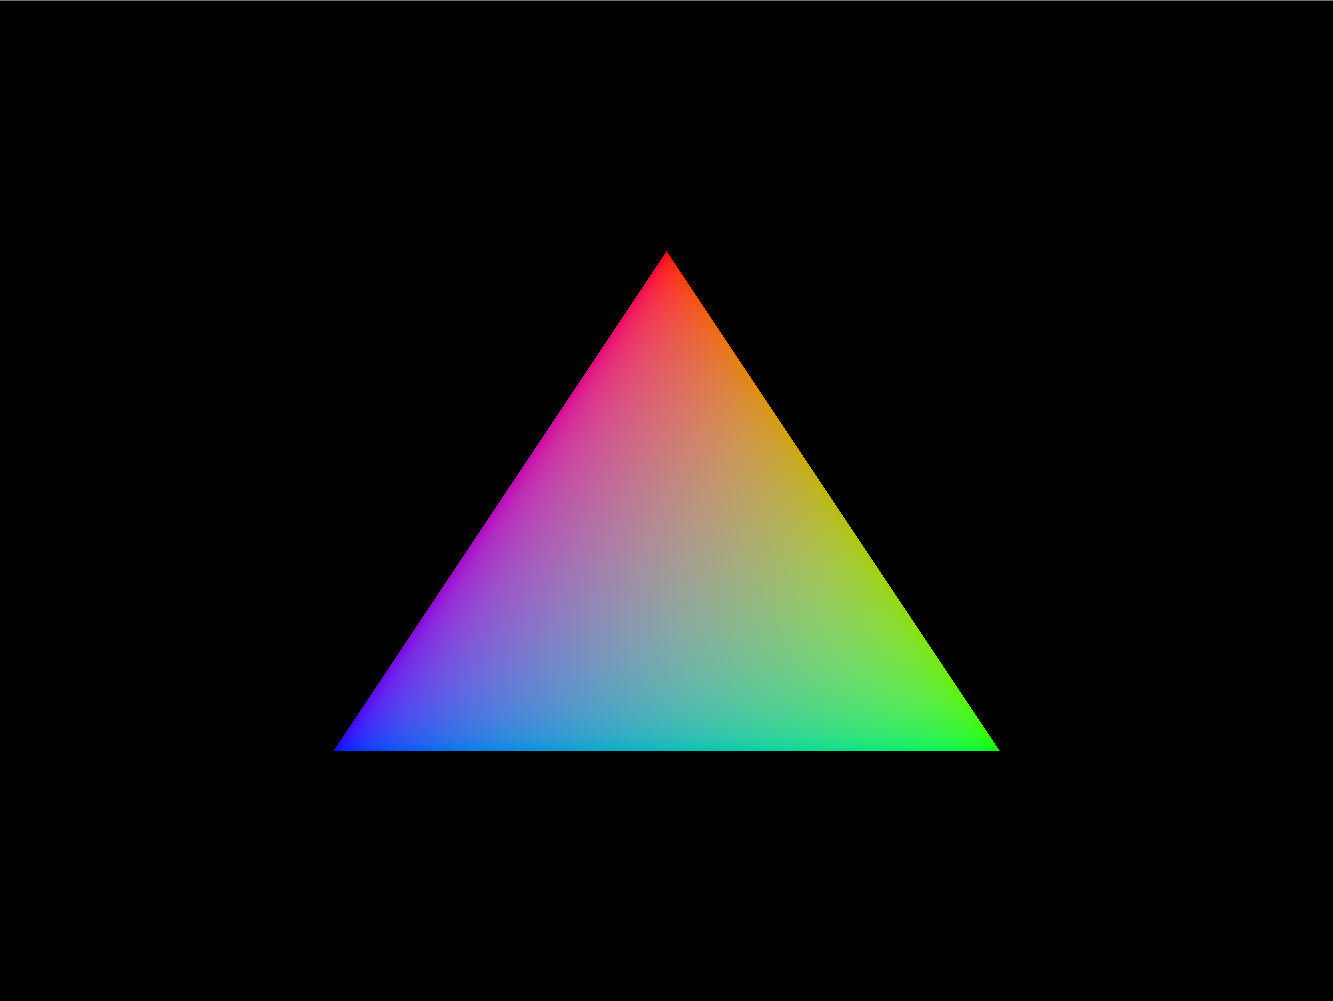 A single triangle with colourful shading, known as the 'hello triangle' in graphics.